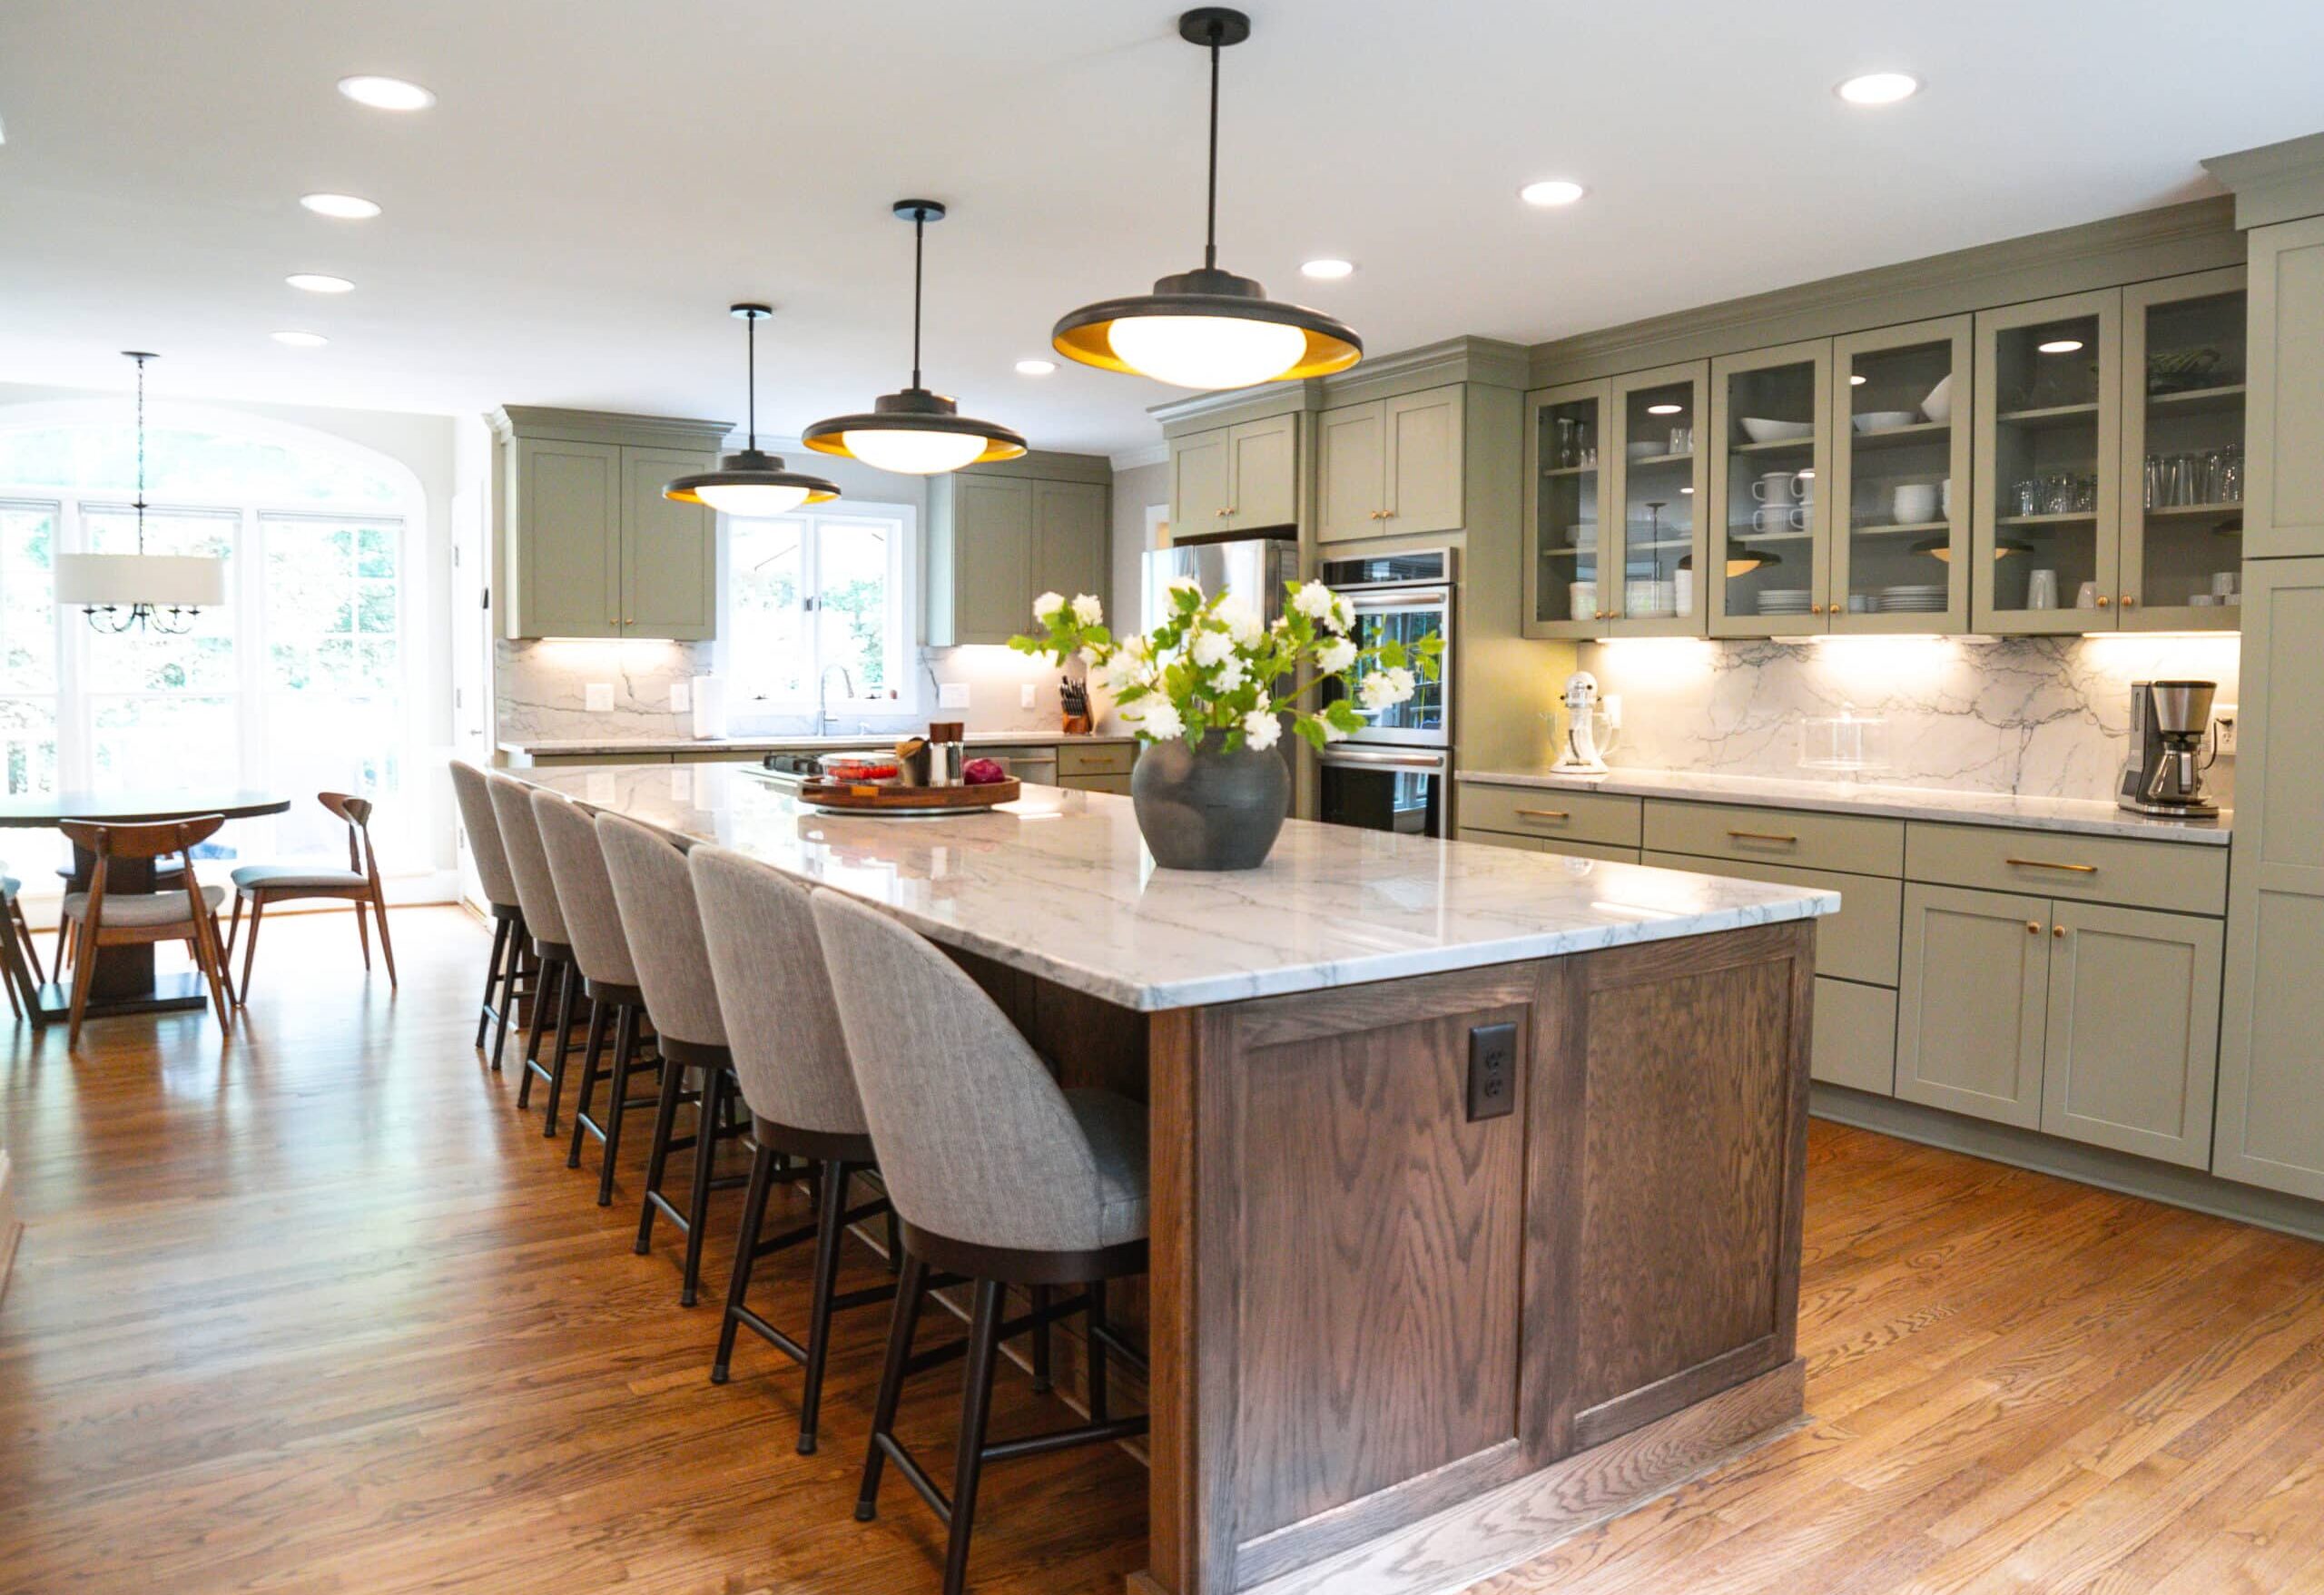 What Should You Include in a Kitchen Remodel